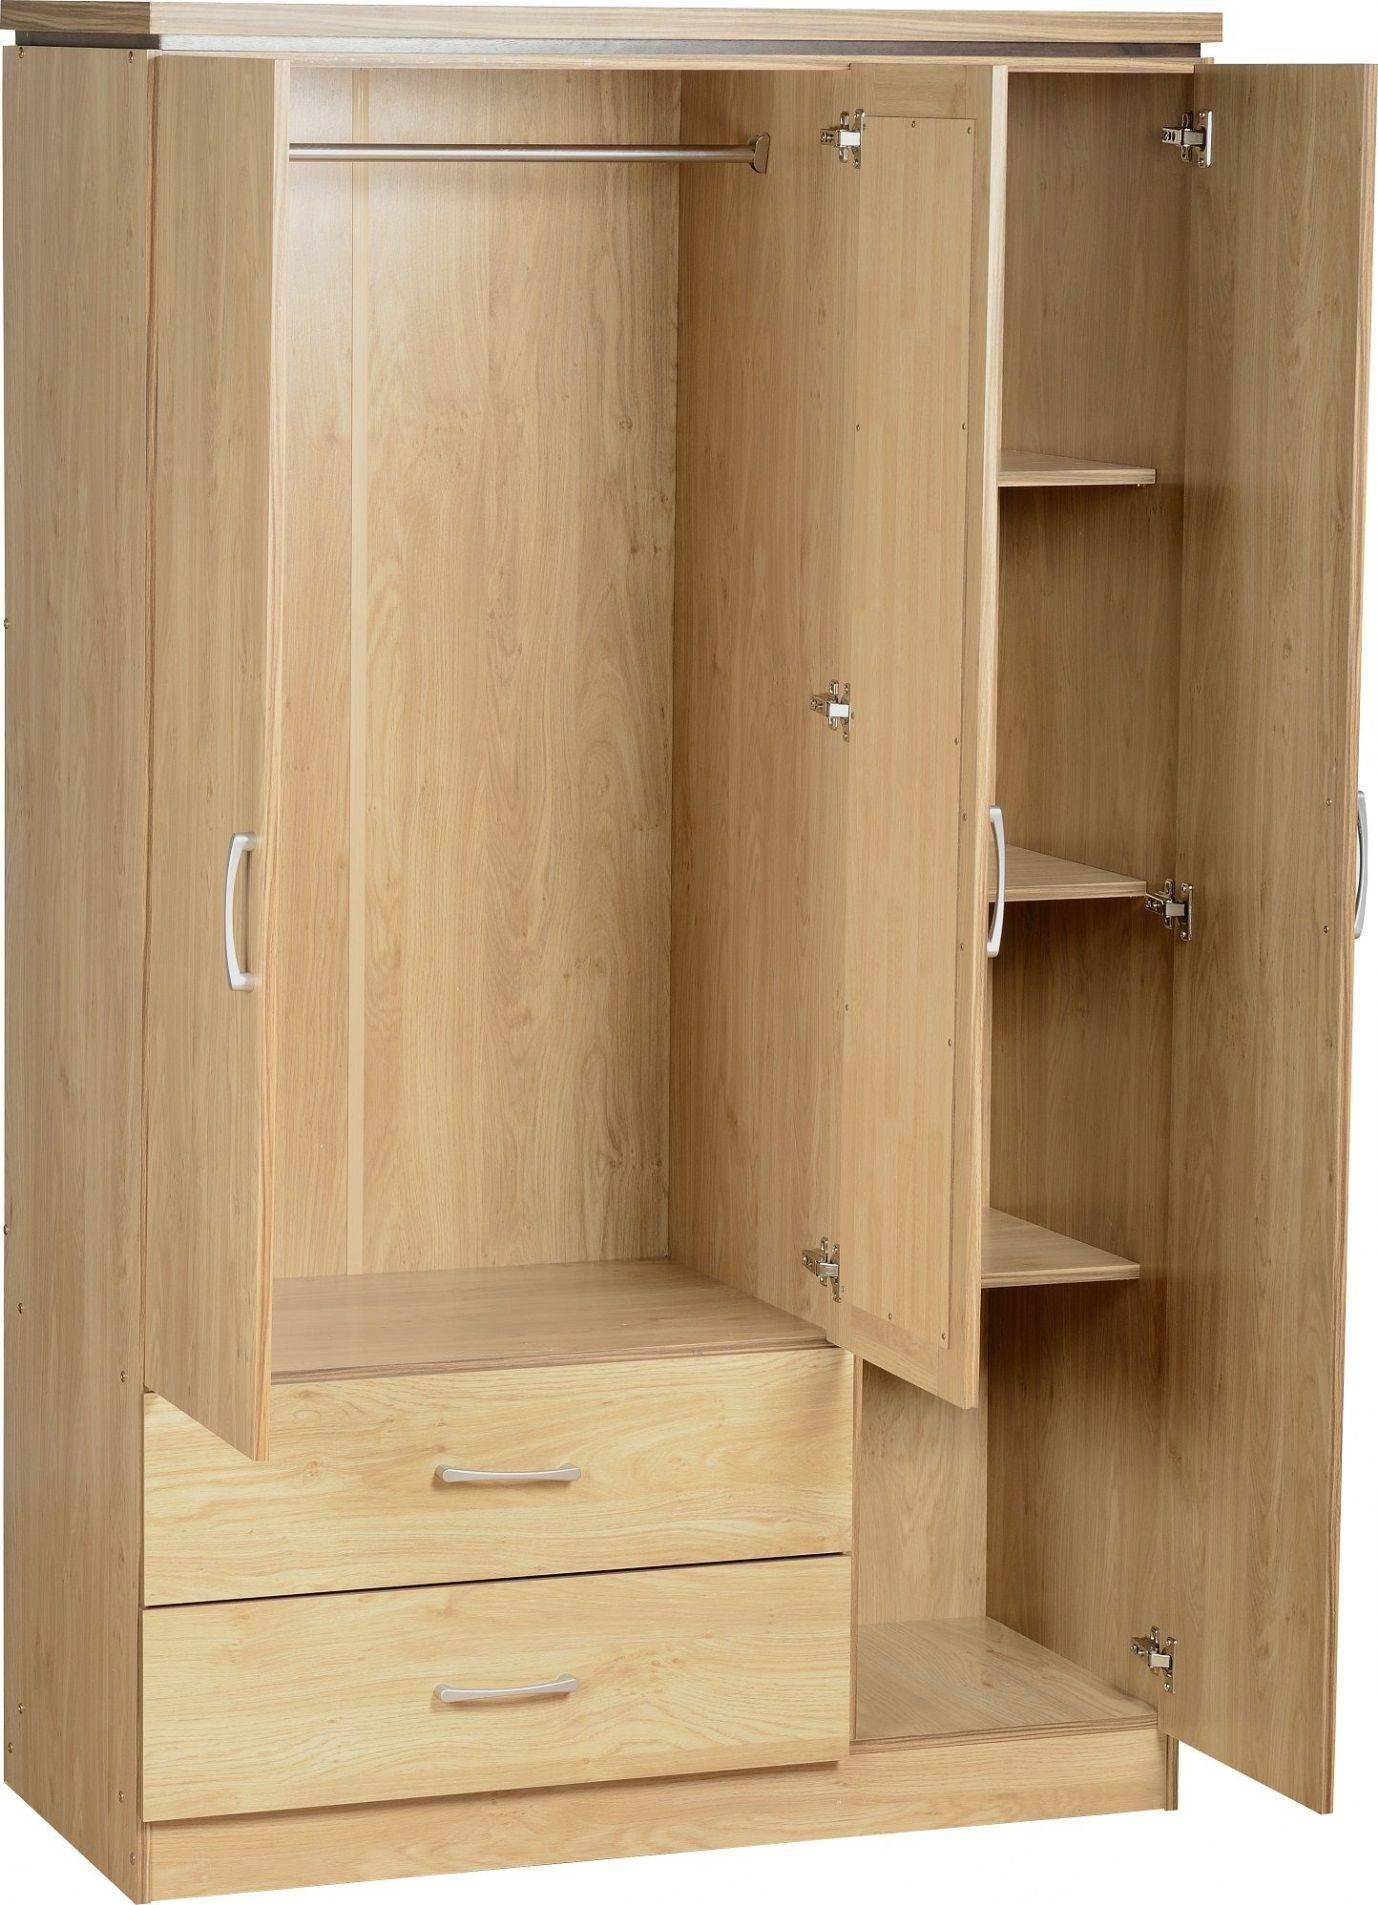 Wardrobes With Shelves, Ca Baumhaus Amelie Oak Childrens Kids Regarding Wardrobe With Shelves And Drawers (View 4 of 30)